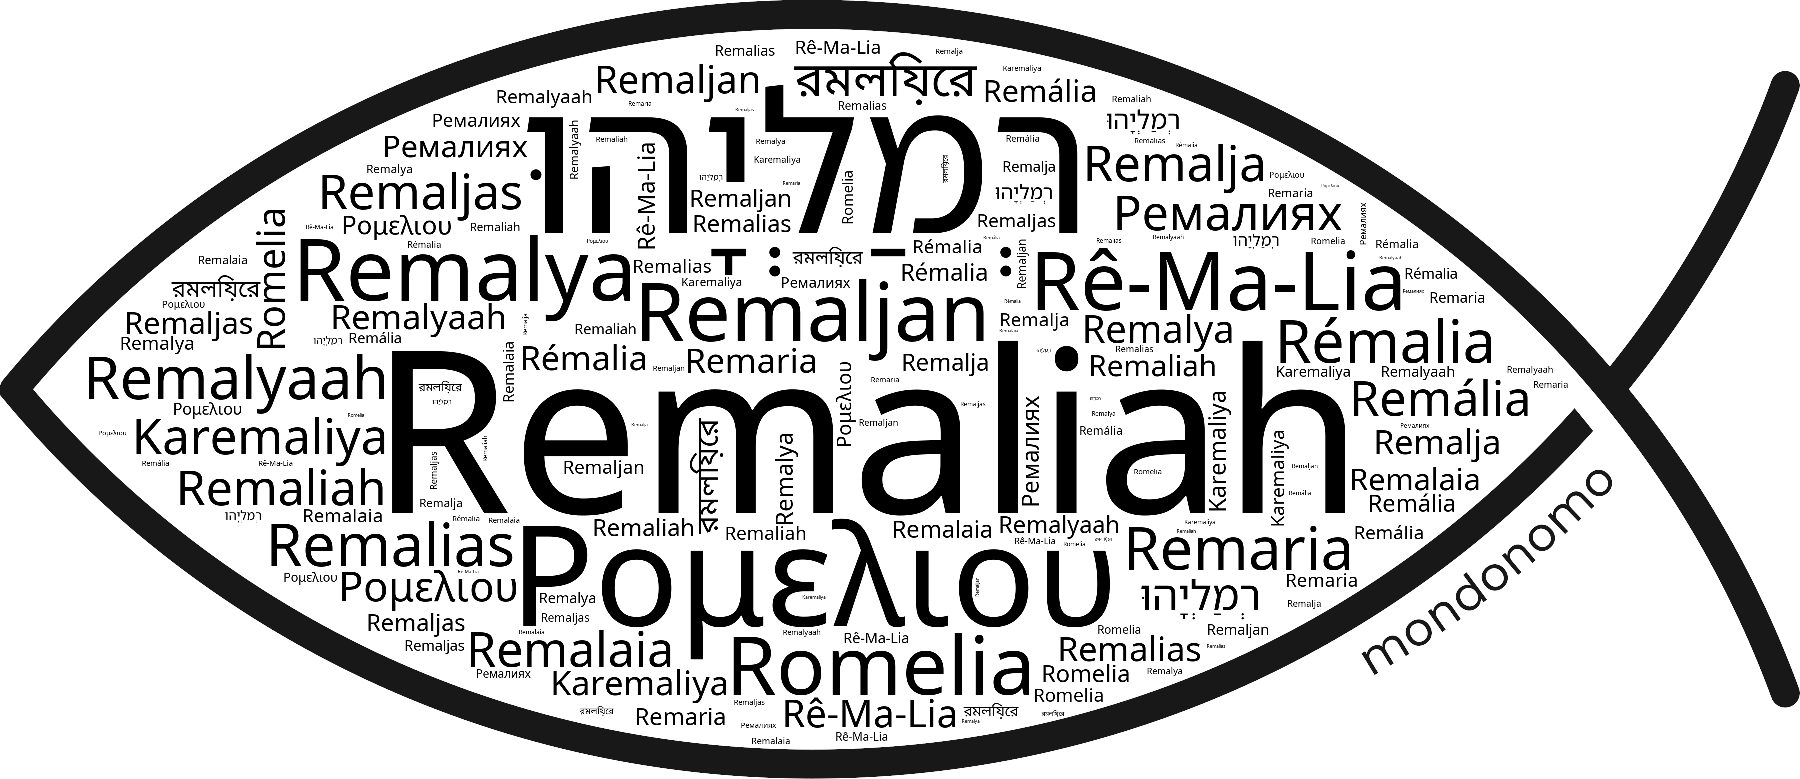 Name Remaliah in the world's Bibles